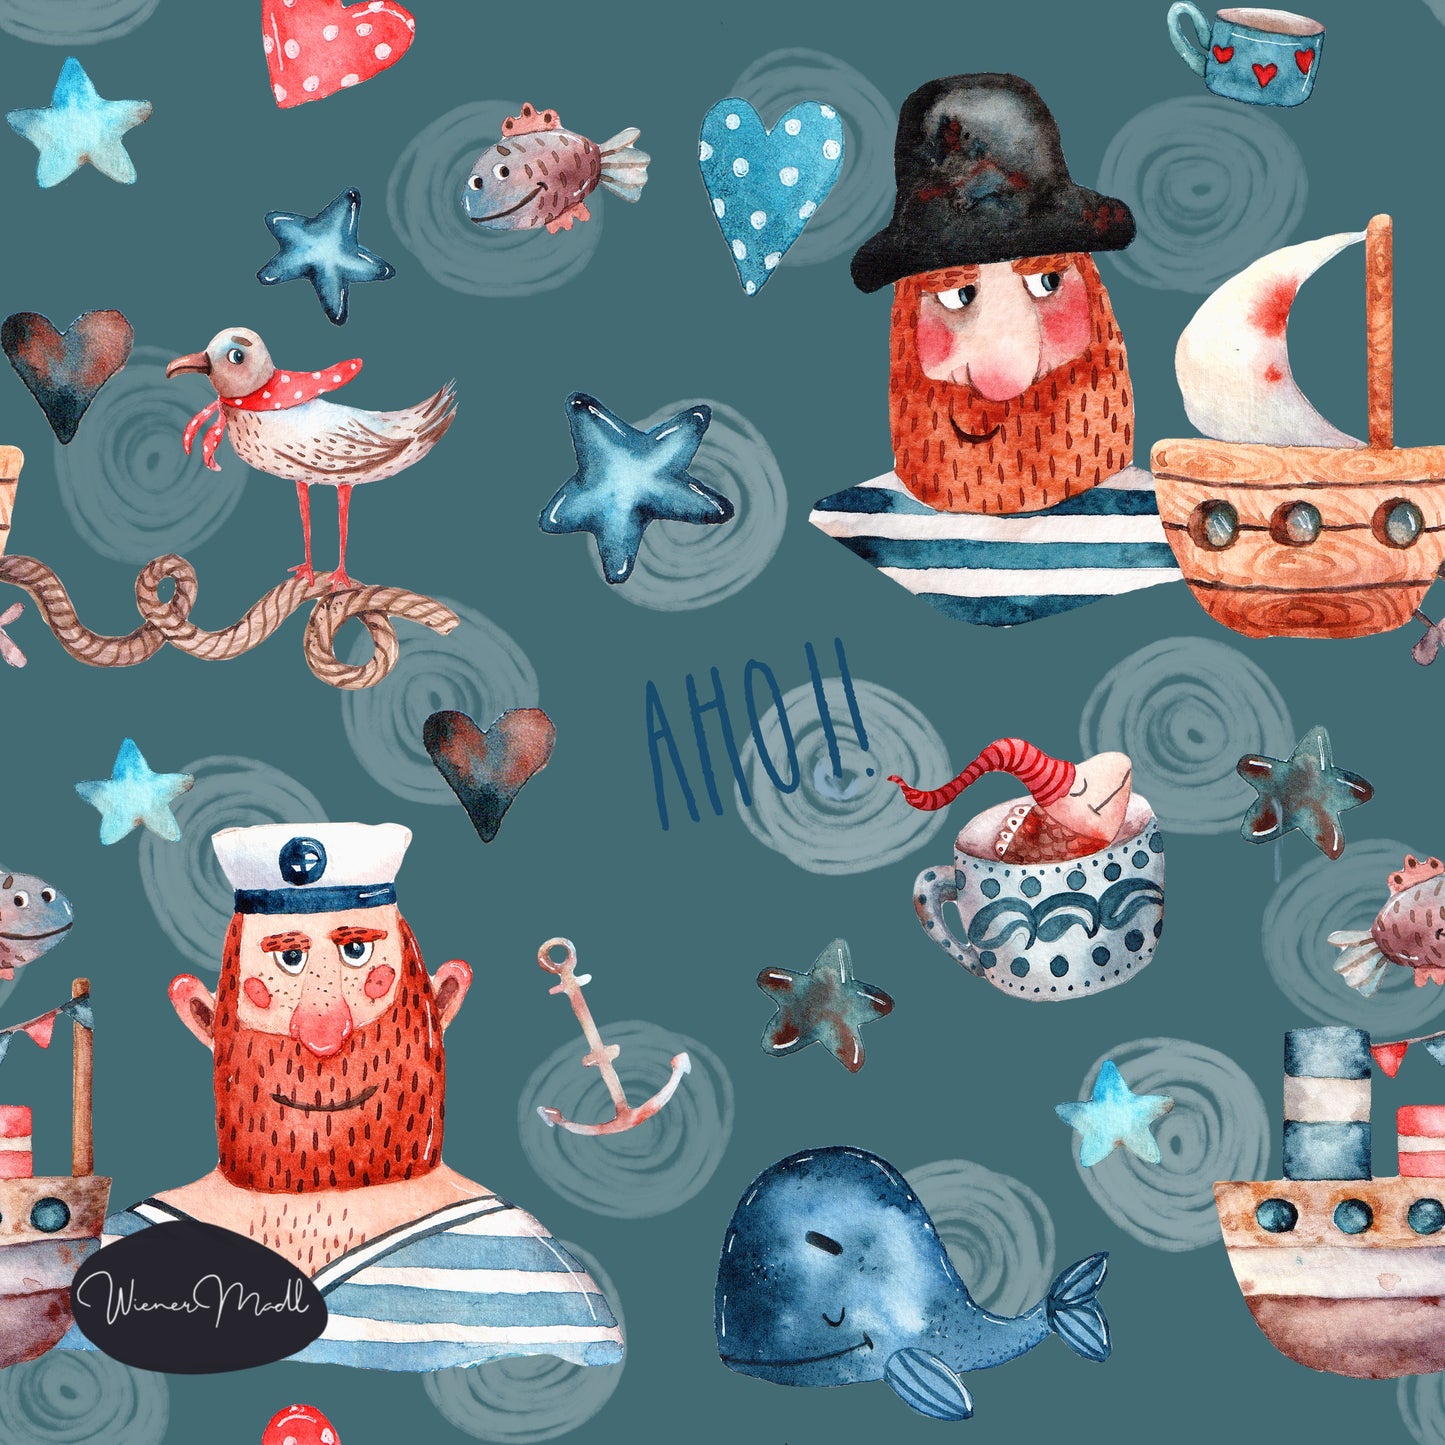 seamless repeat pattern - Ahoi- exclusiv pattern